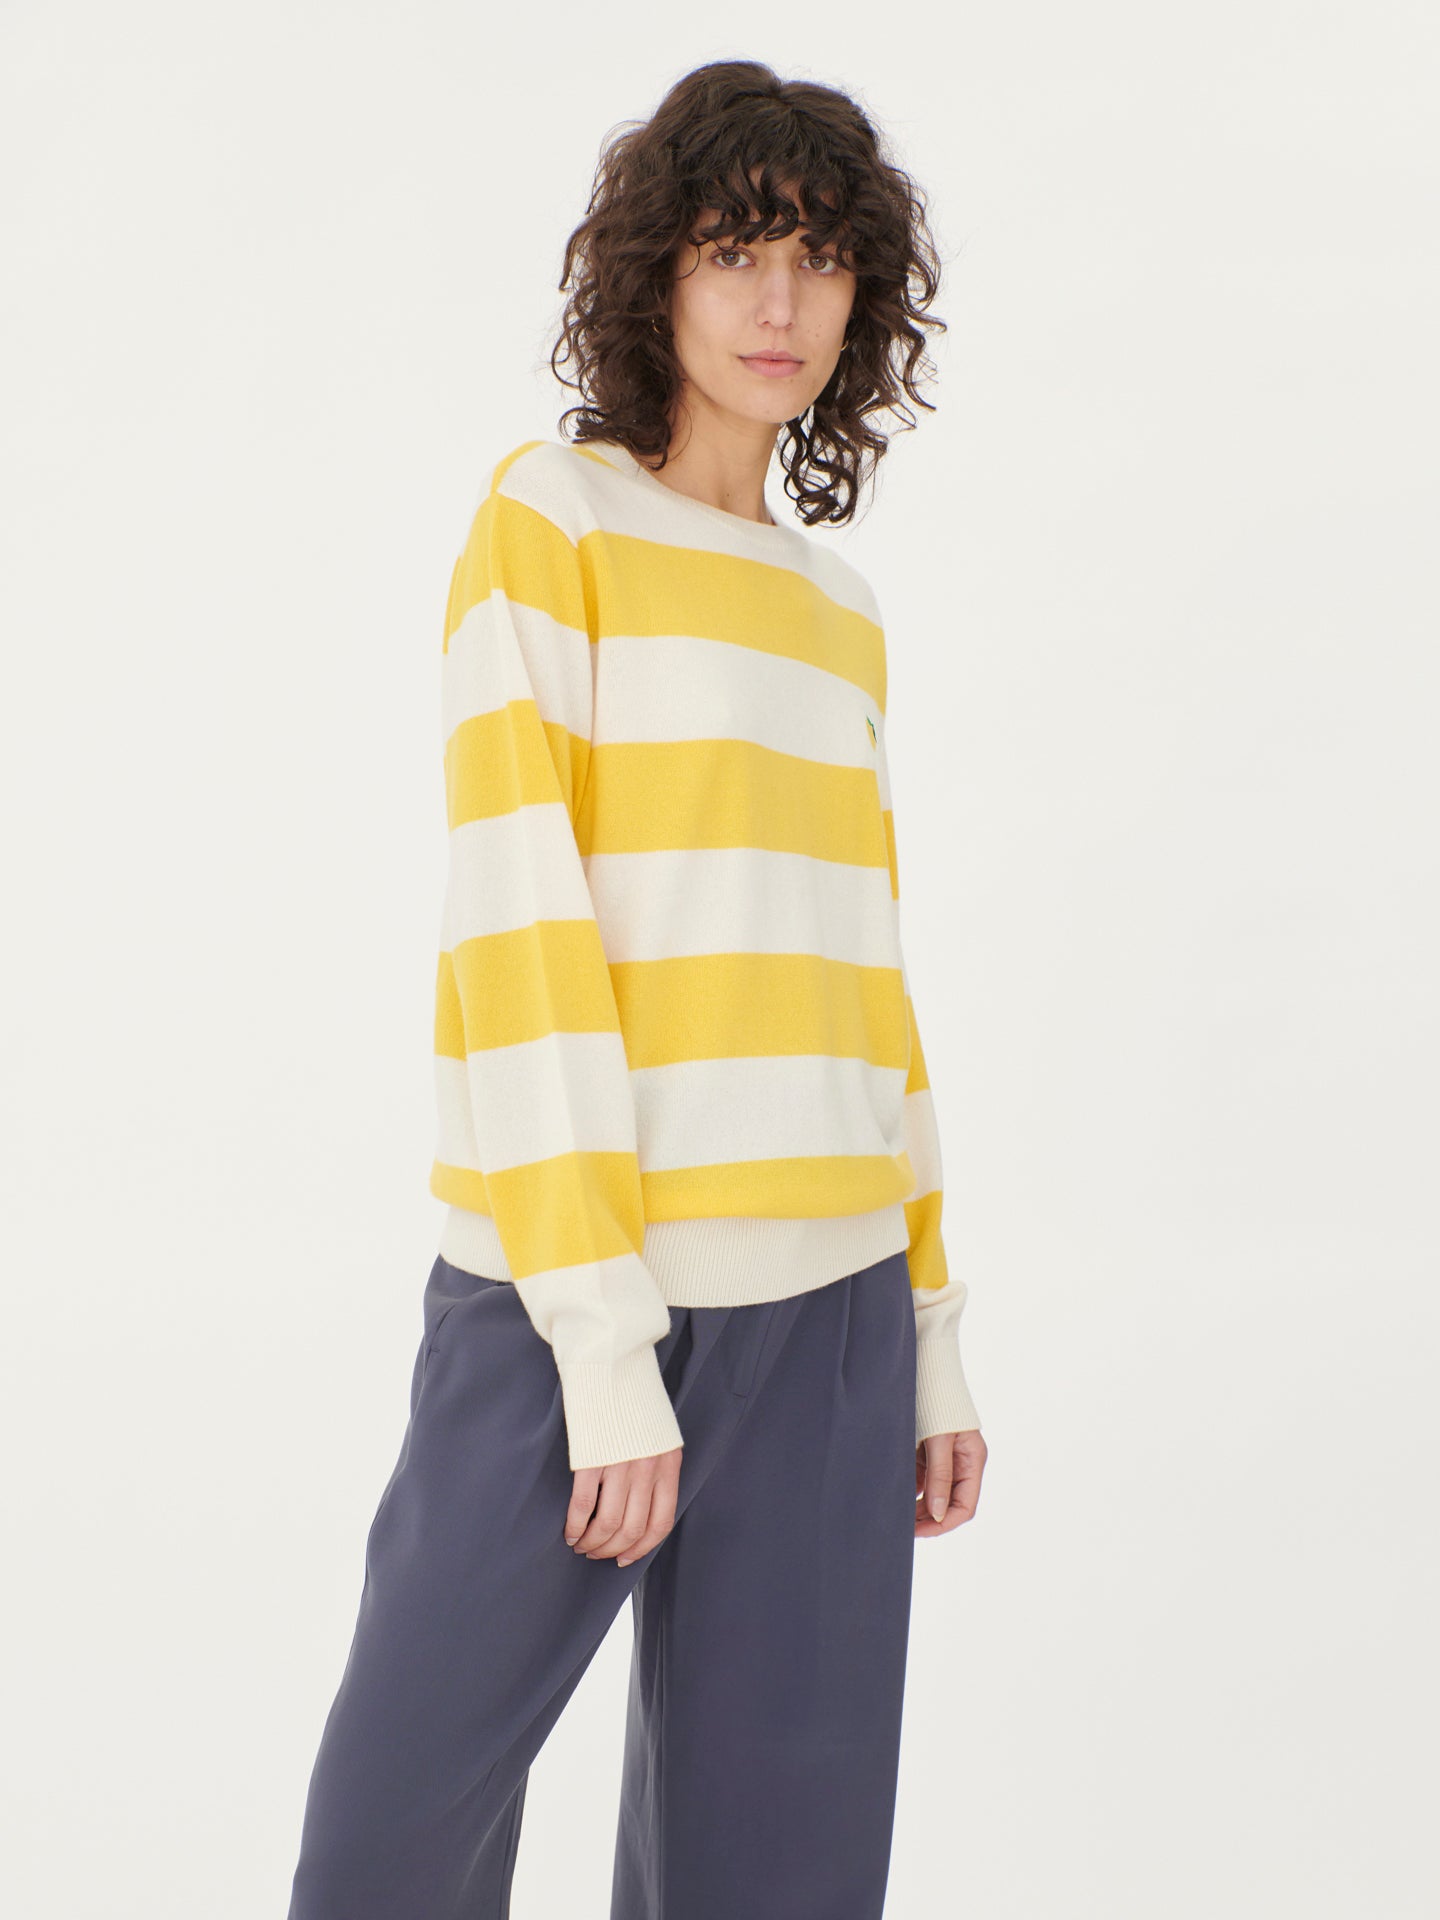 Women's Cashmere Striped C-neck with Embroidery Yellow - Gobi Cashmere